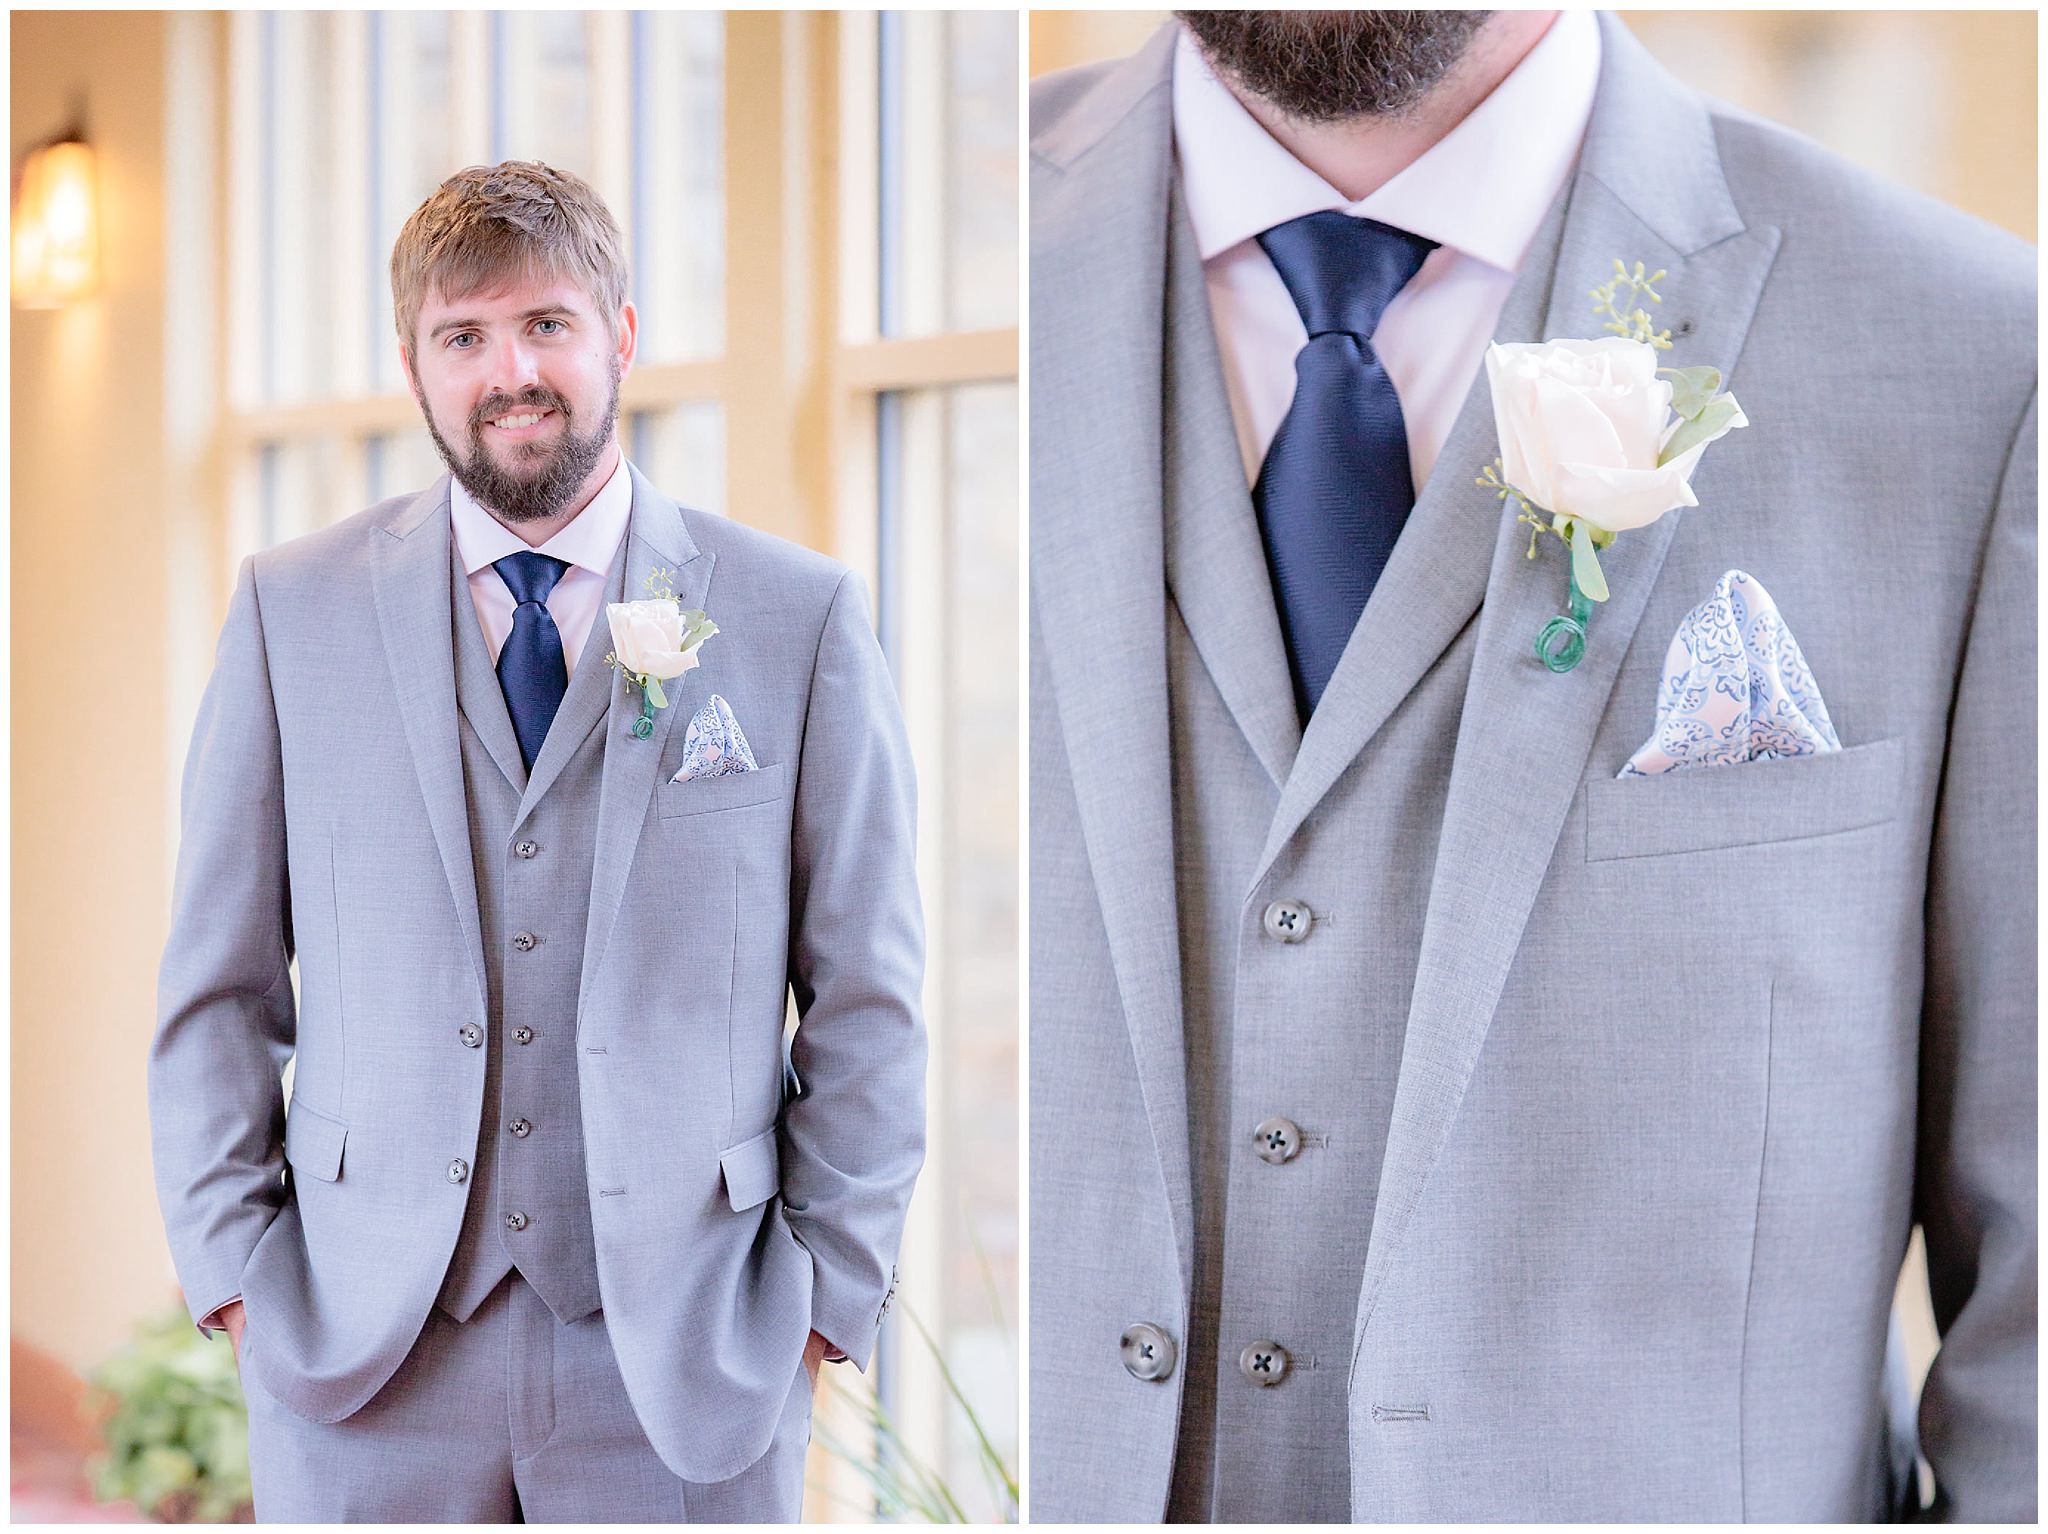 Groom portrait and boutonniere by Muetzel's at Oglebay